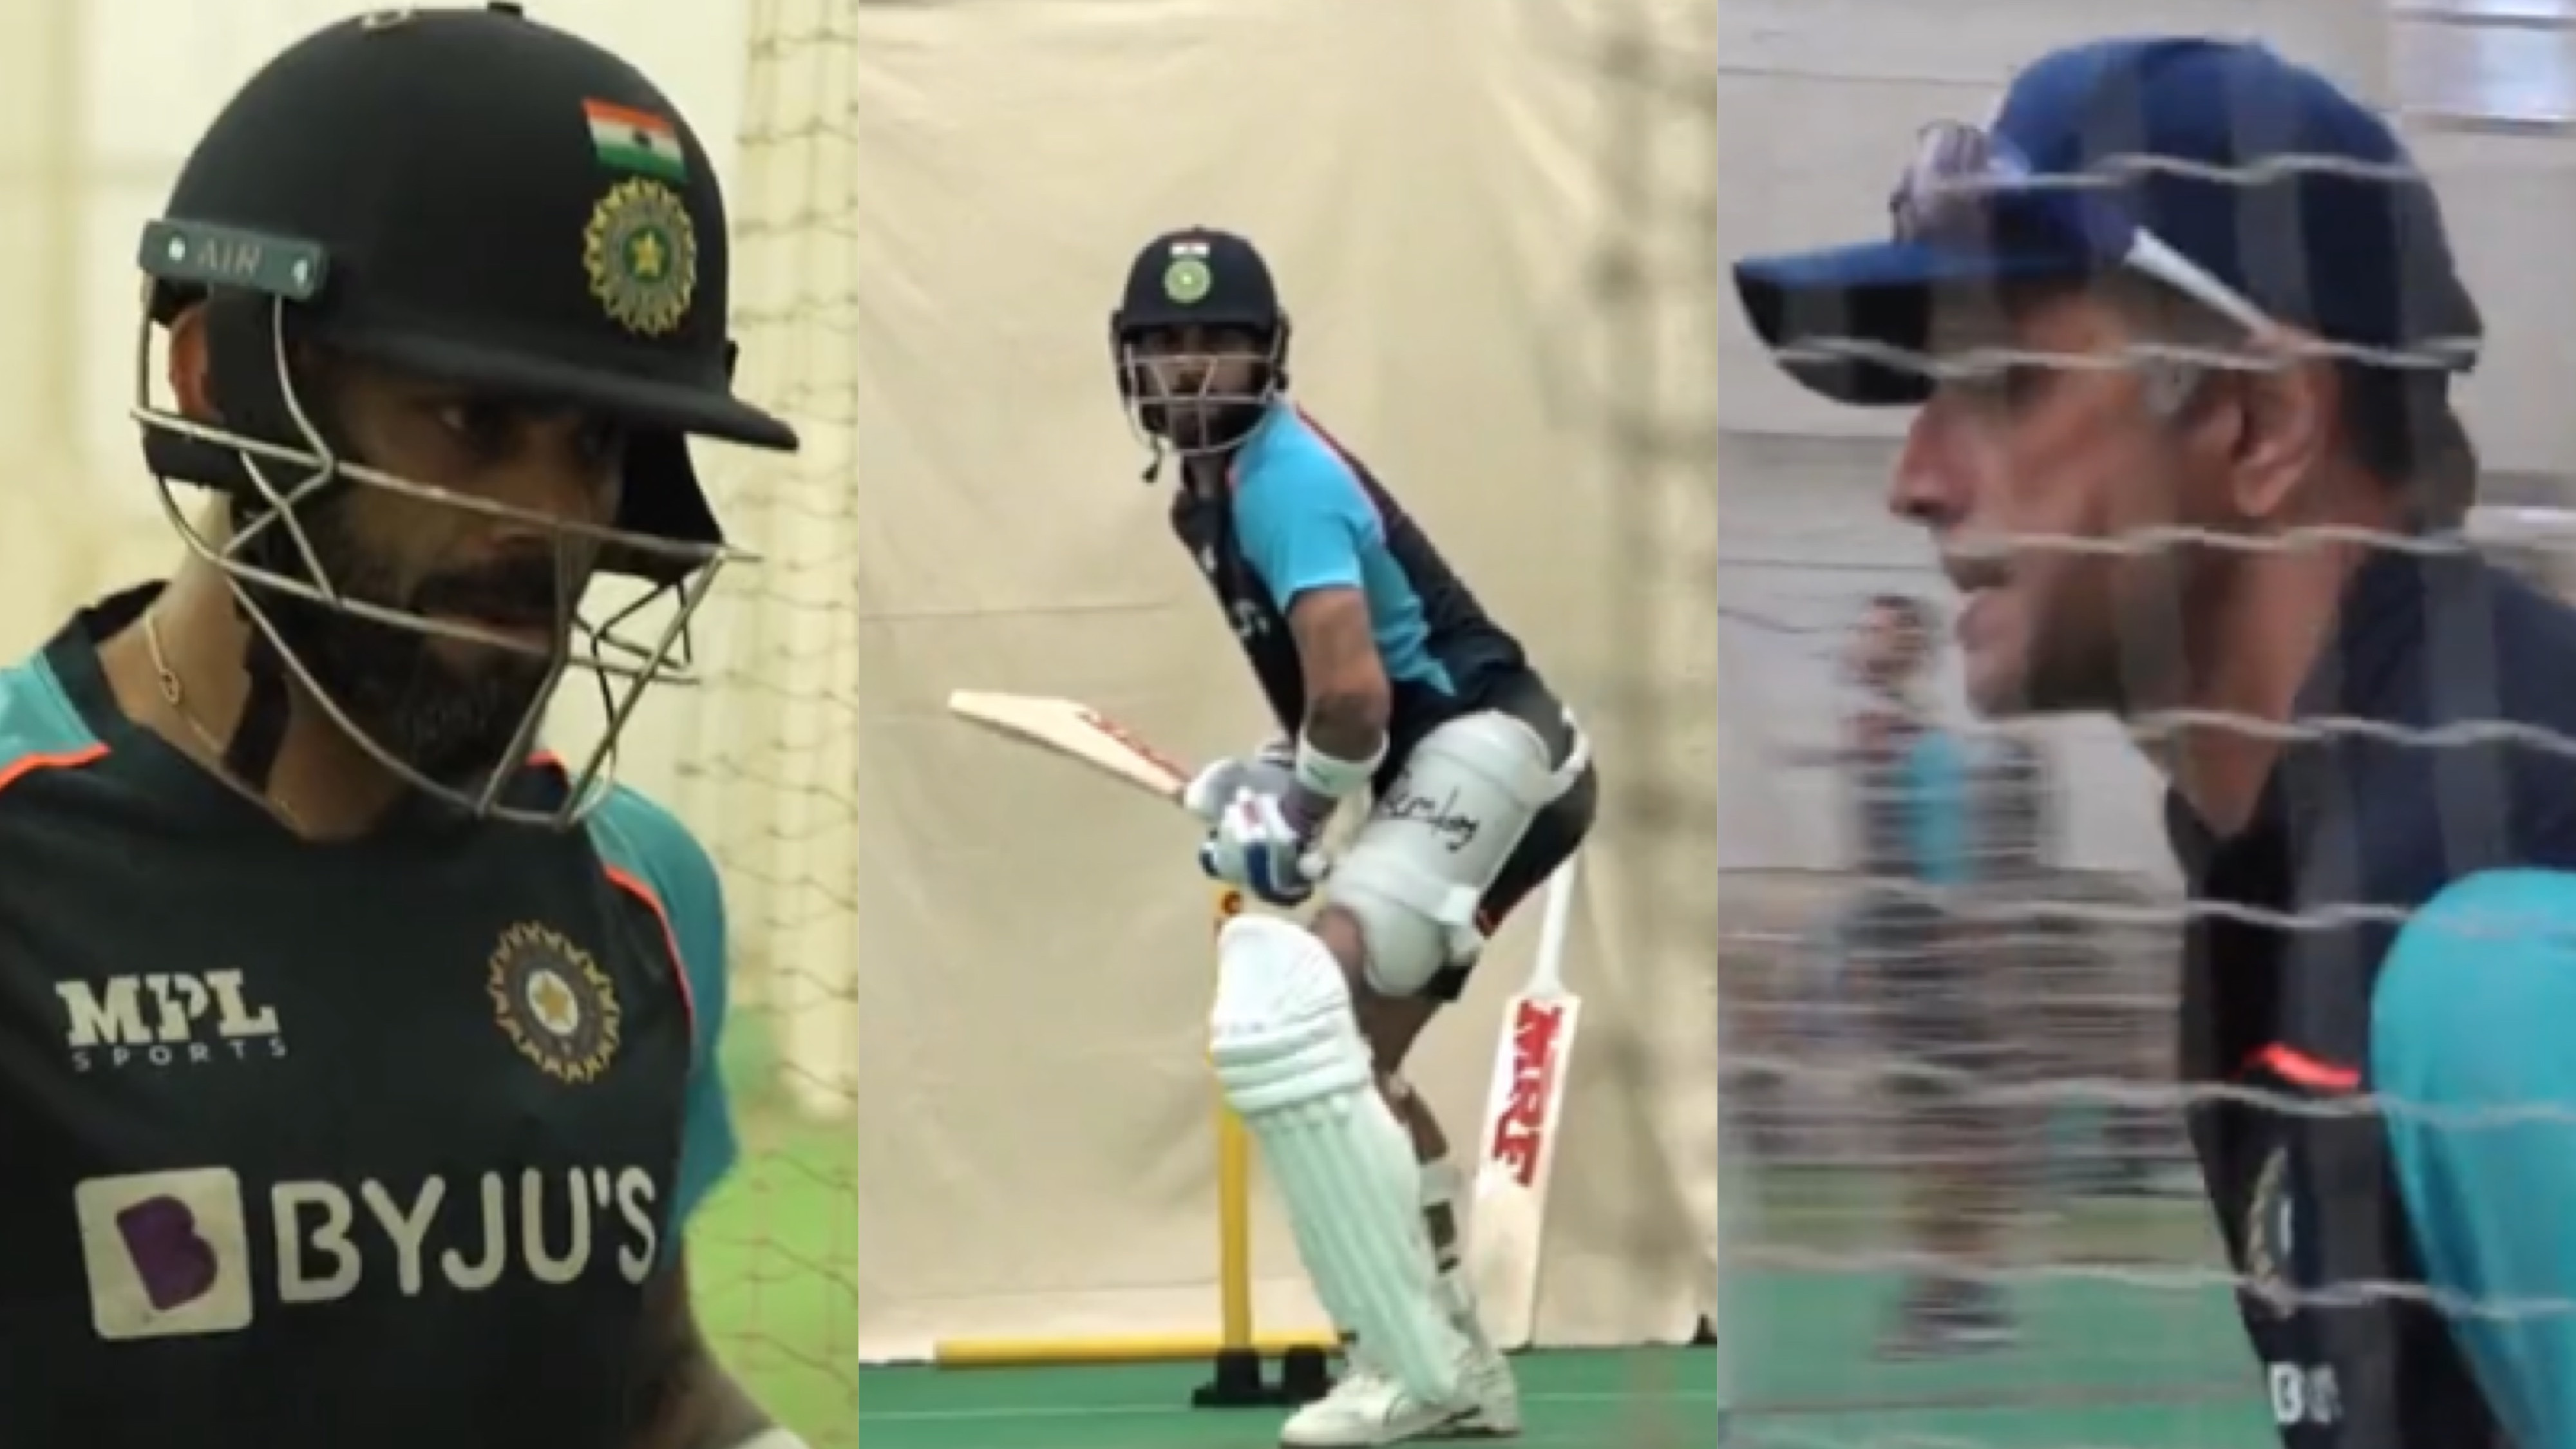 IND v NZ 2021: WATCH - Virat Kohli has a hit at indoor nets; takes throwdowns from Rahul Dravid